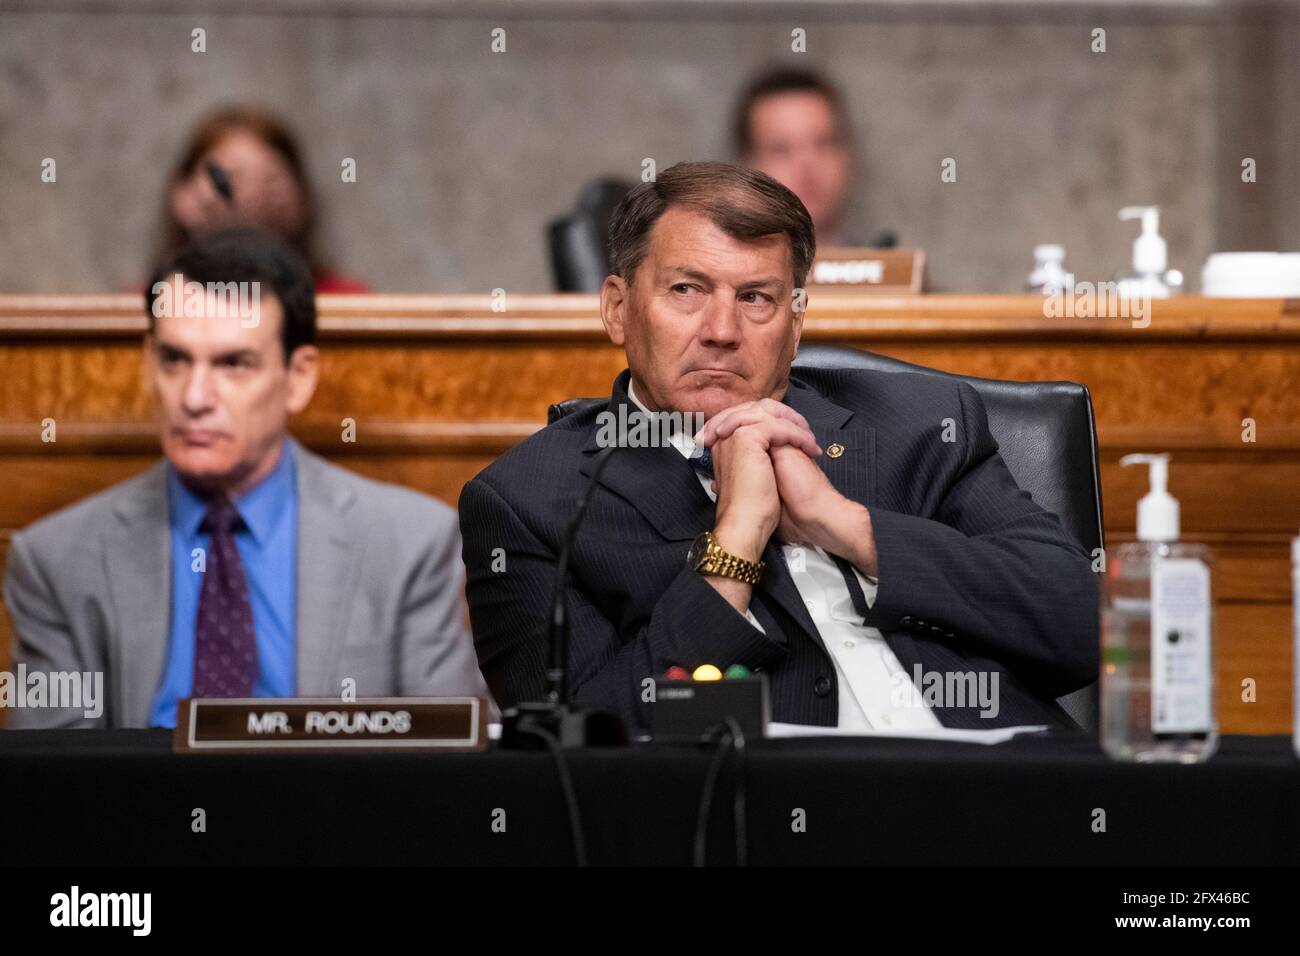 Washington, United States Of America. 25th May, 2021. United States Senator Mike Rounds (Republican of South Dakota) listens to the panel during a Senate Committee on Armed Services nominations hearing in the Dirksen Senate Office Building in Washington, DC, Tuesday, May 25, 2021. Credit: Rod Lamkey/CNP/Sipa USA Credit: Sipa USA/Alamy Live News Stock Photo